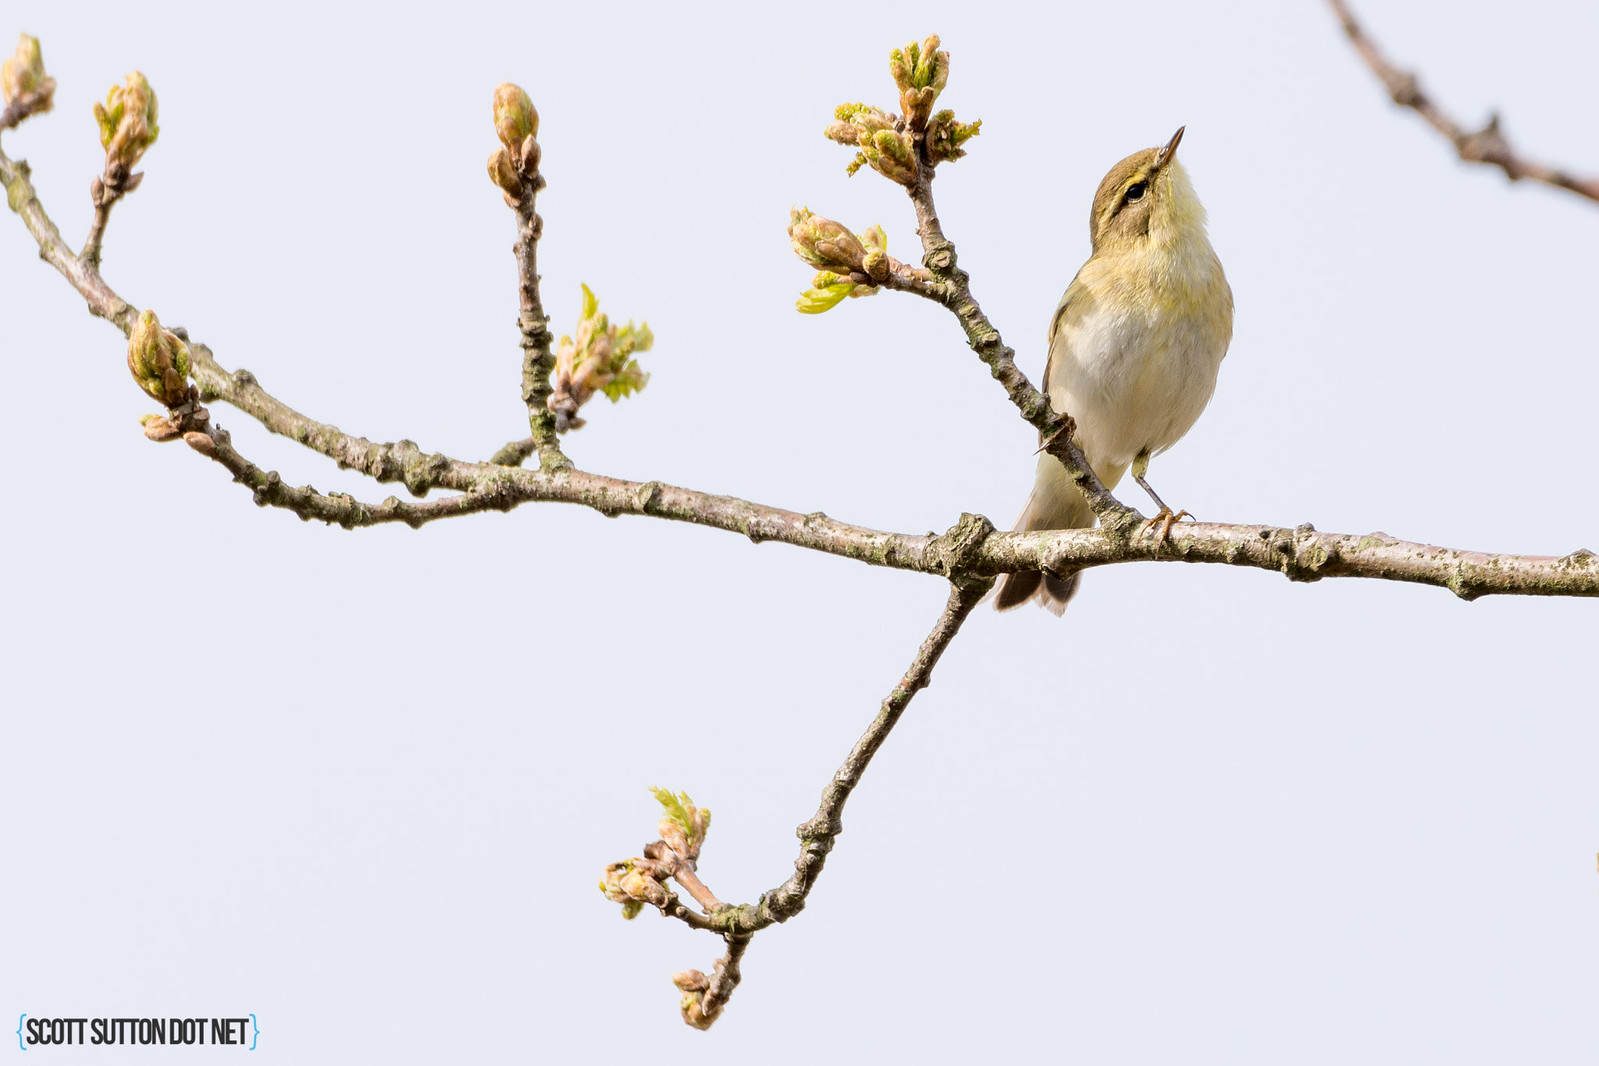 Willow warbler (I think)